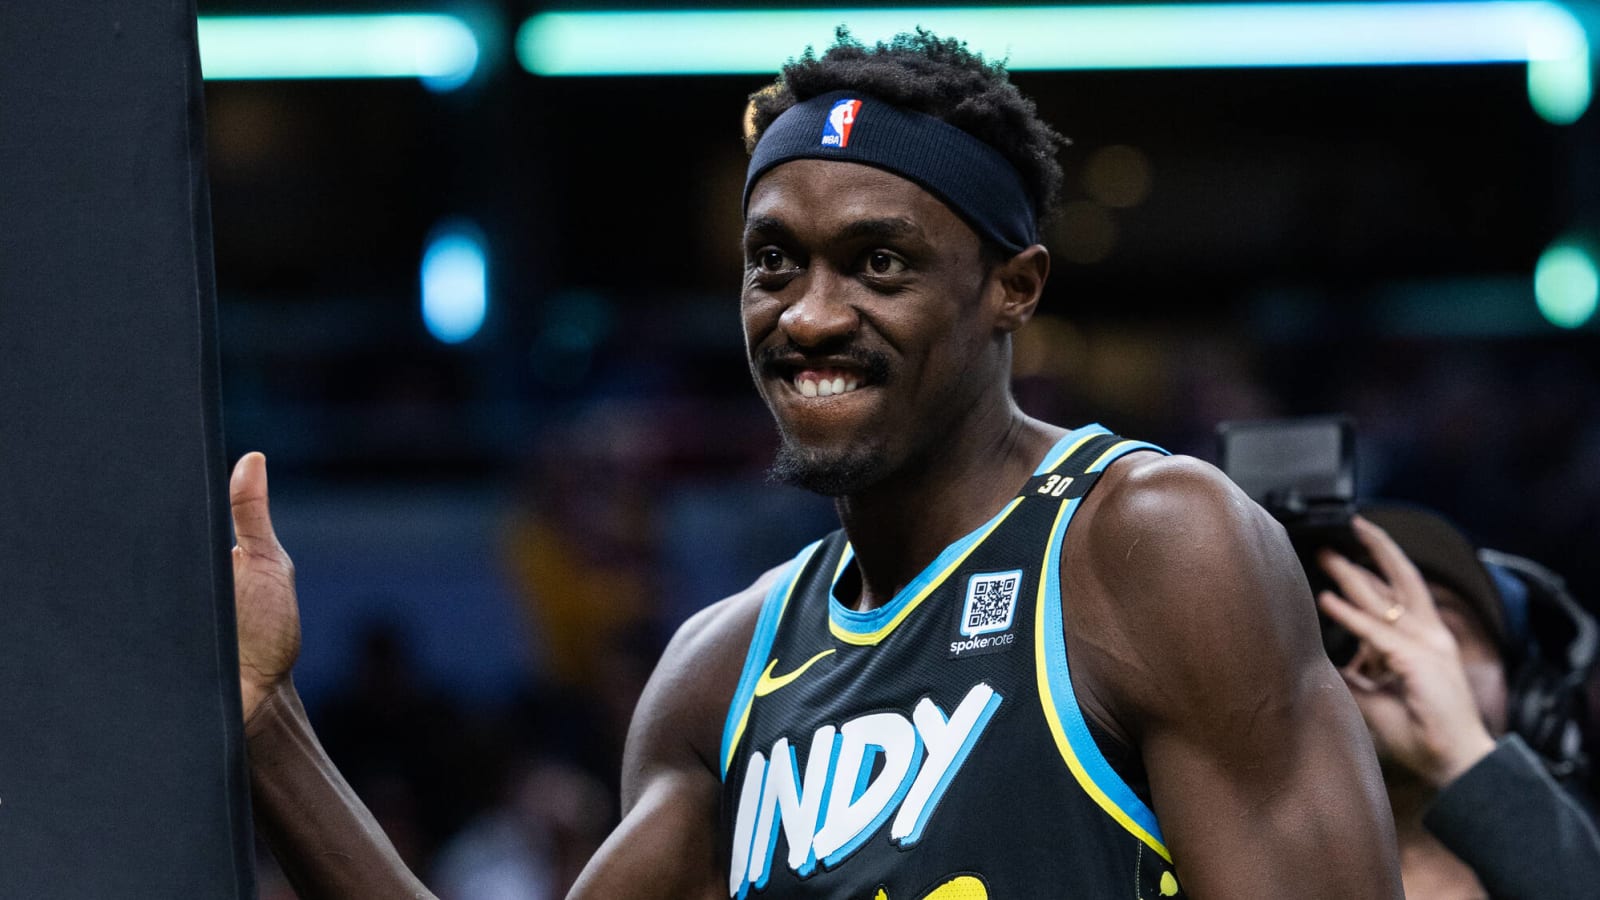 Pascal Siakam discusses long-term future with Indiana Pacers and upcoming free agency